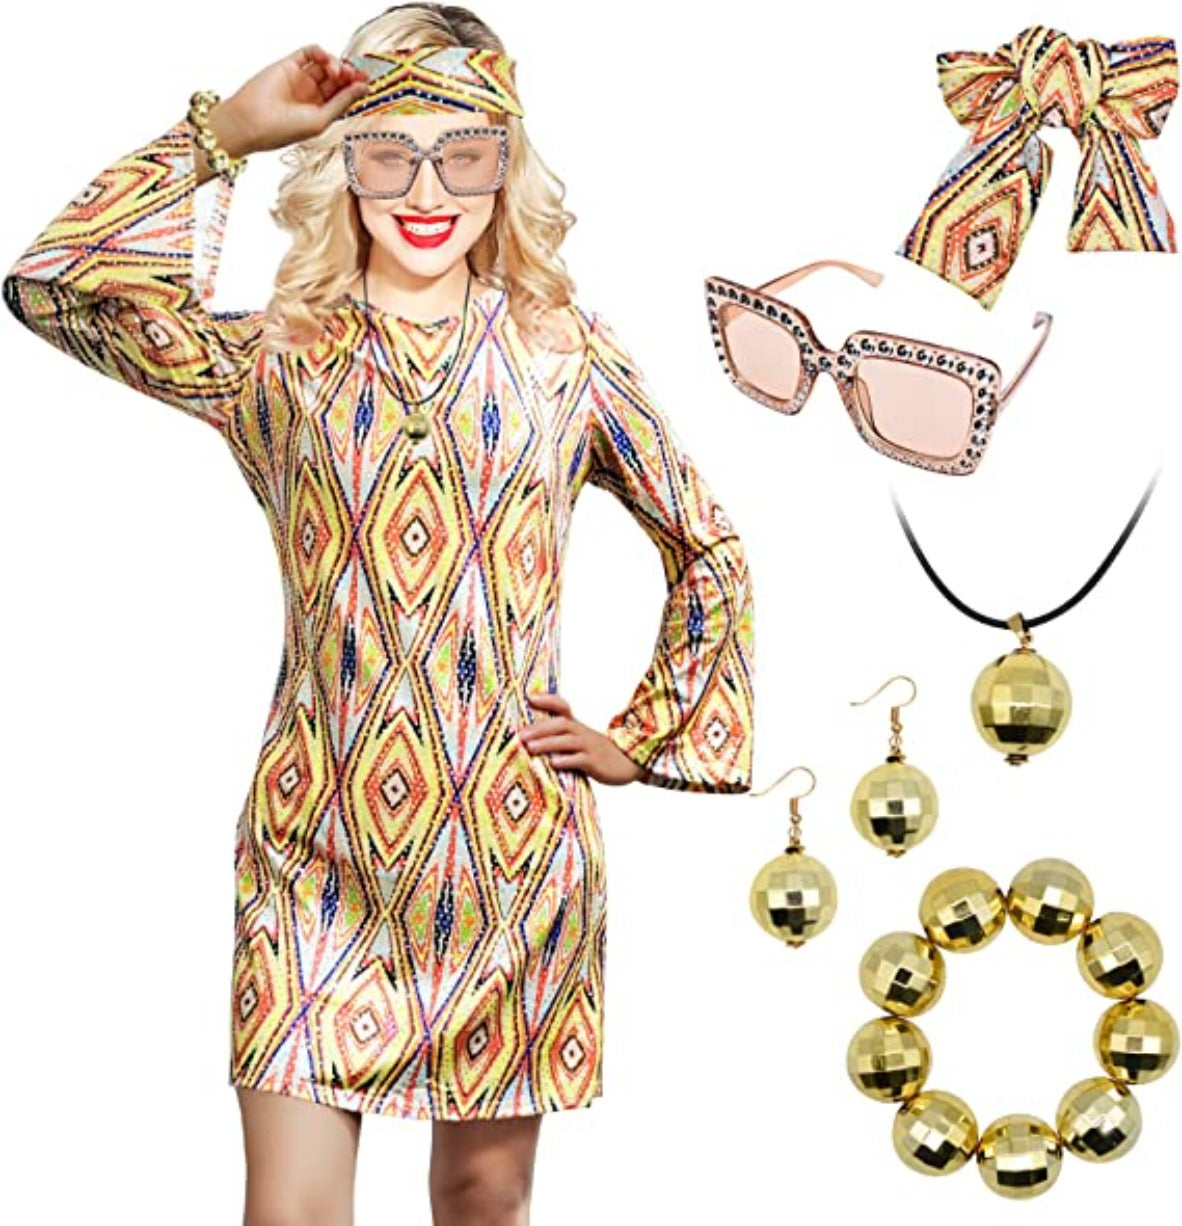 Hippy Heavenly Dress with Accessories